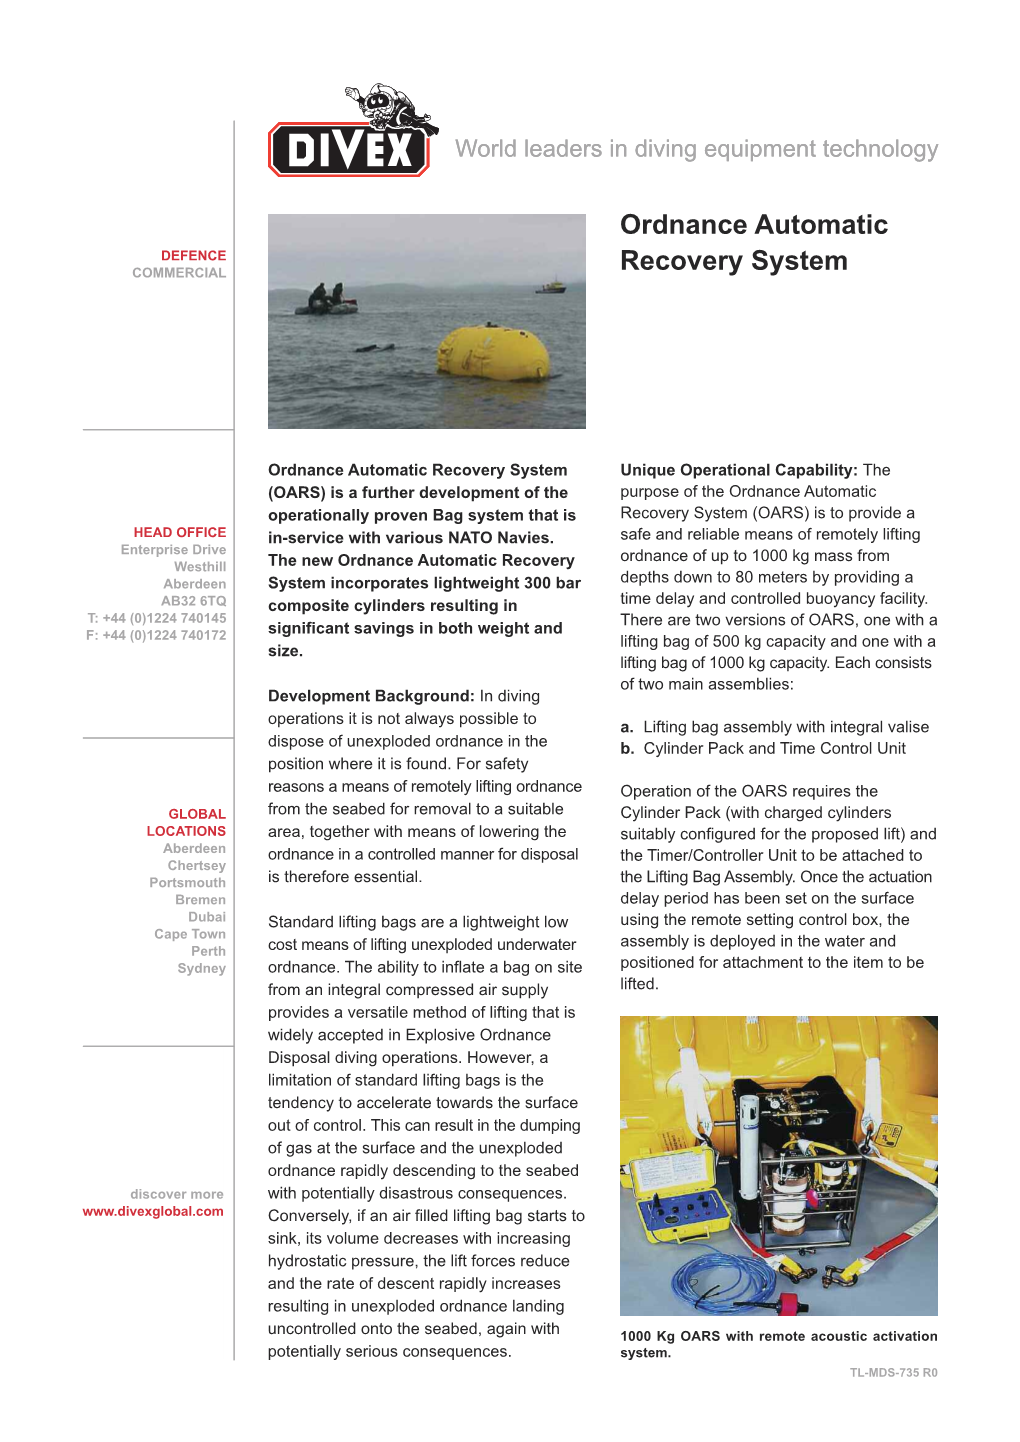 Ordnance Automatic Recovery System